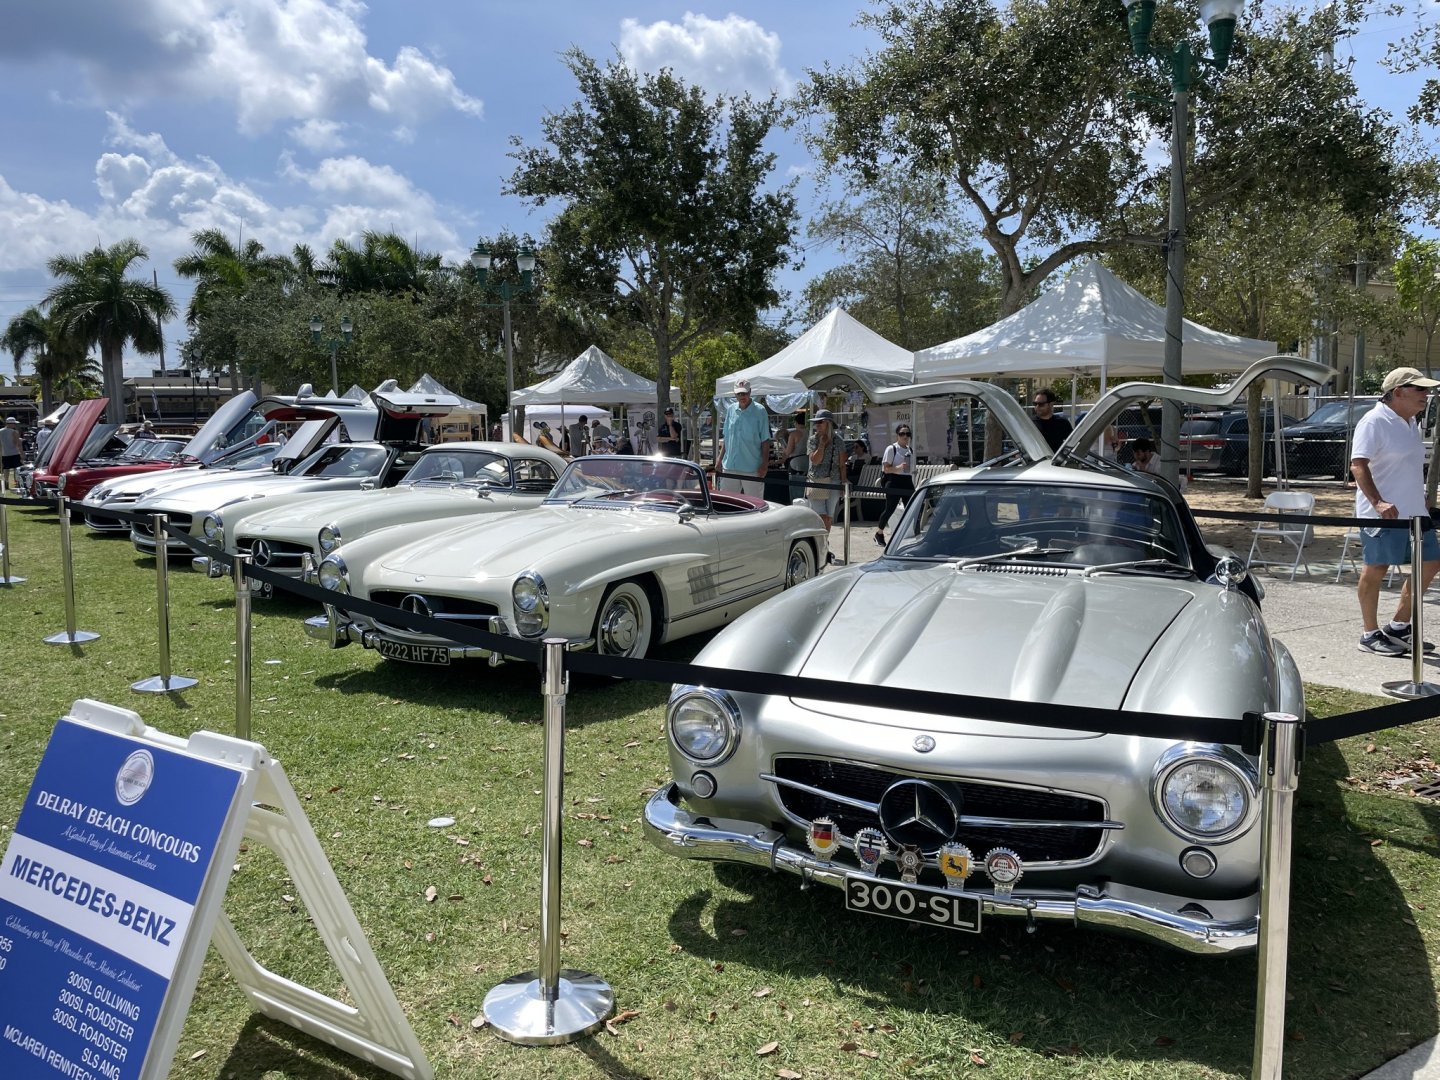 the_legendary_mercedes-benz_gullwing_that_has_inspired_so_many_gracing_the_lawn_0.jpeg